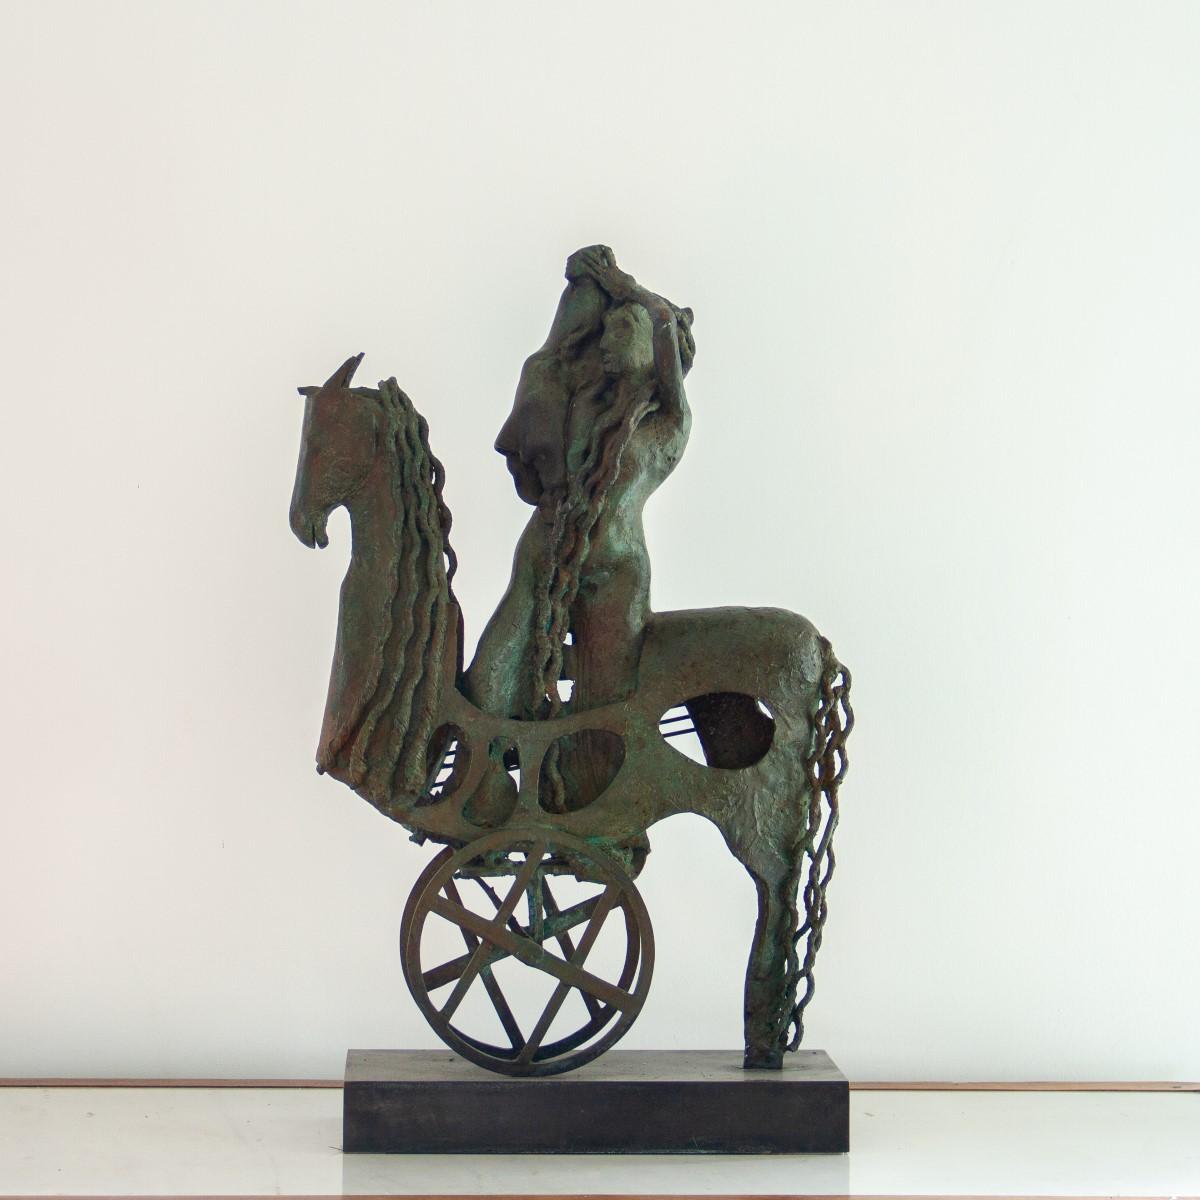 A Spanish bronze table sculpture by Oscar Estruga titled 'Soporte para Ganimedes', which translates directly to 'support for Ganymedes'. This sculpture is set on a steel base and has a lovely verdisgris patina, circa 1979, signed

Oscar Estrugo is